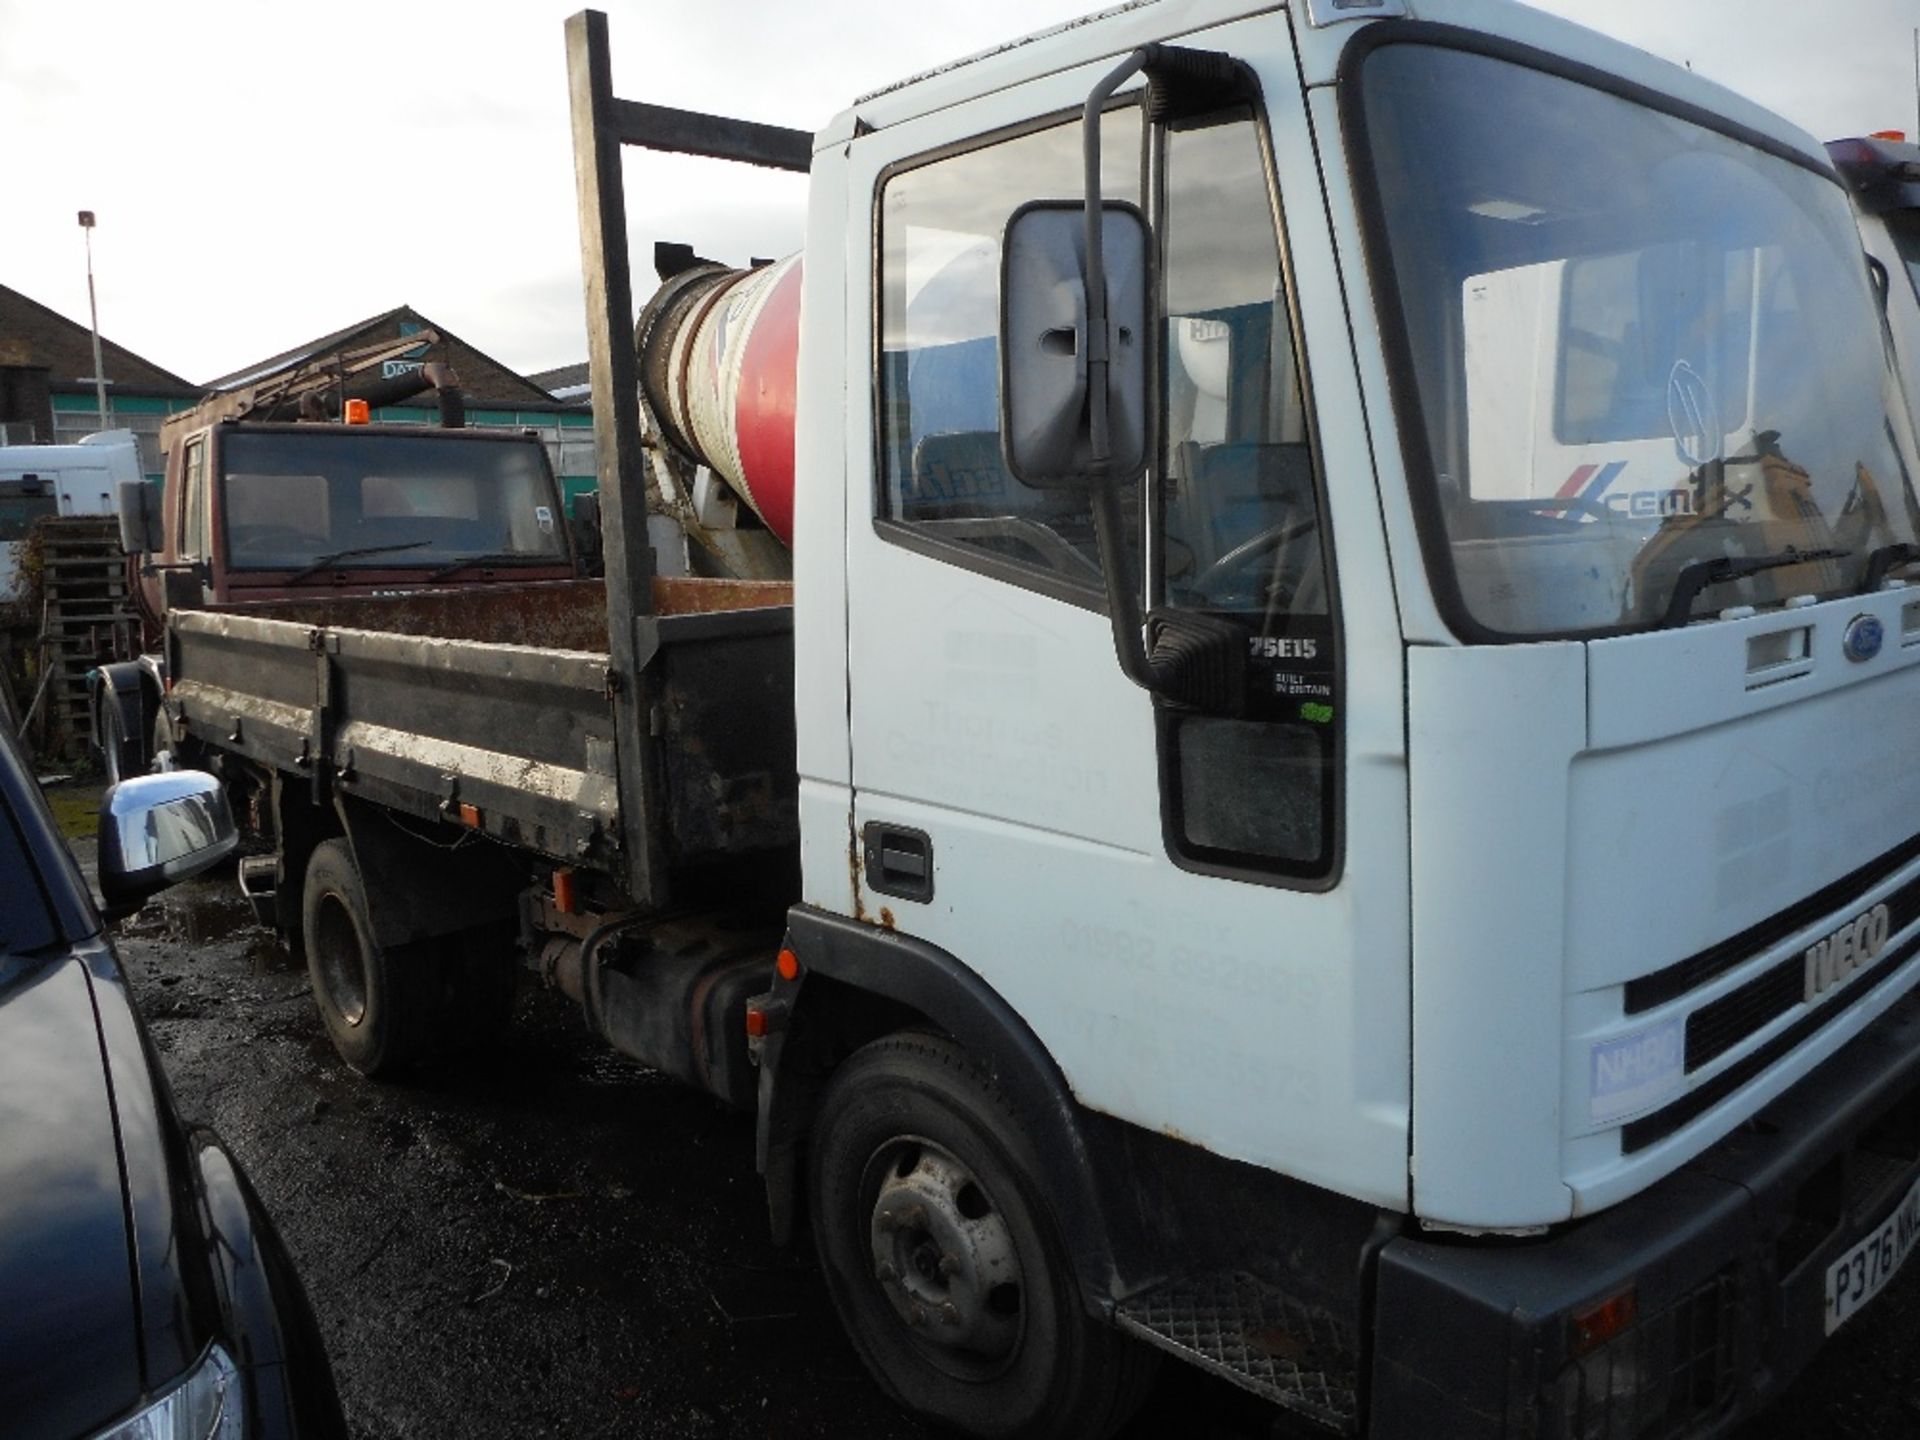 Ford Cargo 75E15 tipper year 1996 approx reg:P376 NKL  Edbro tipping gear fitted.